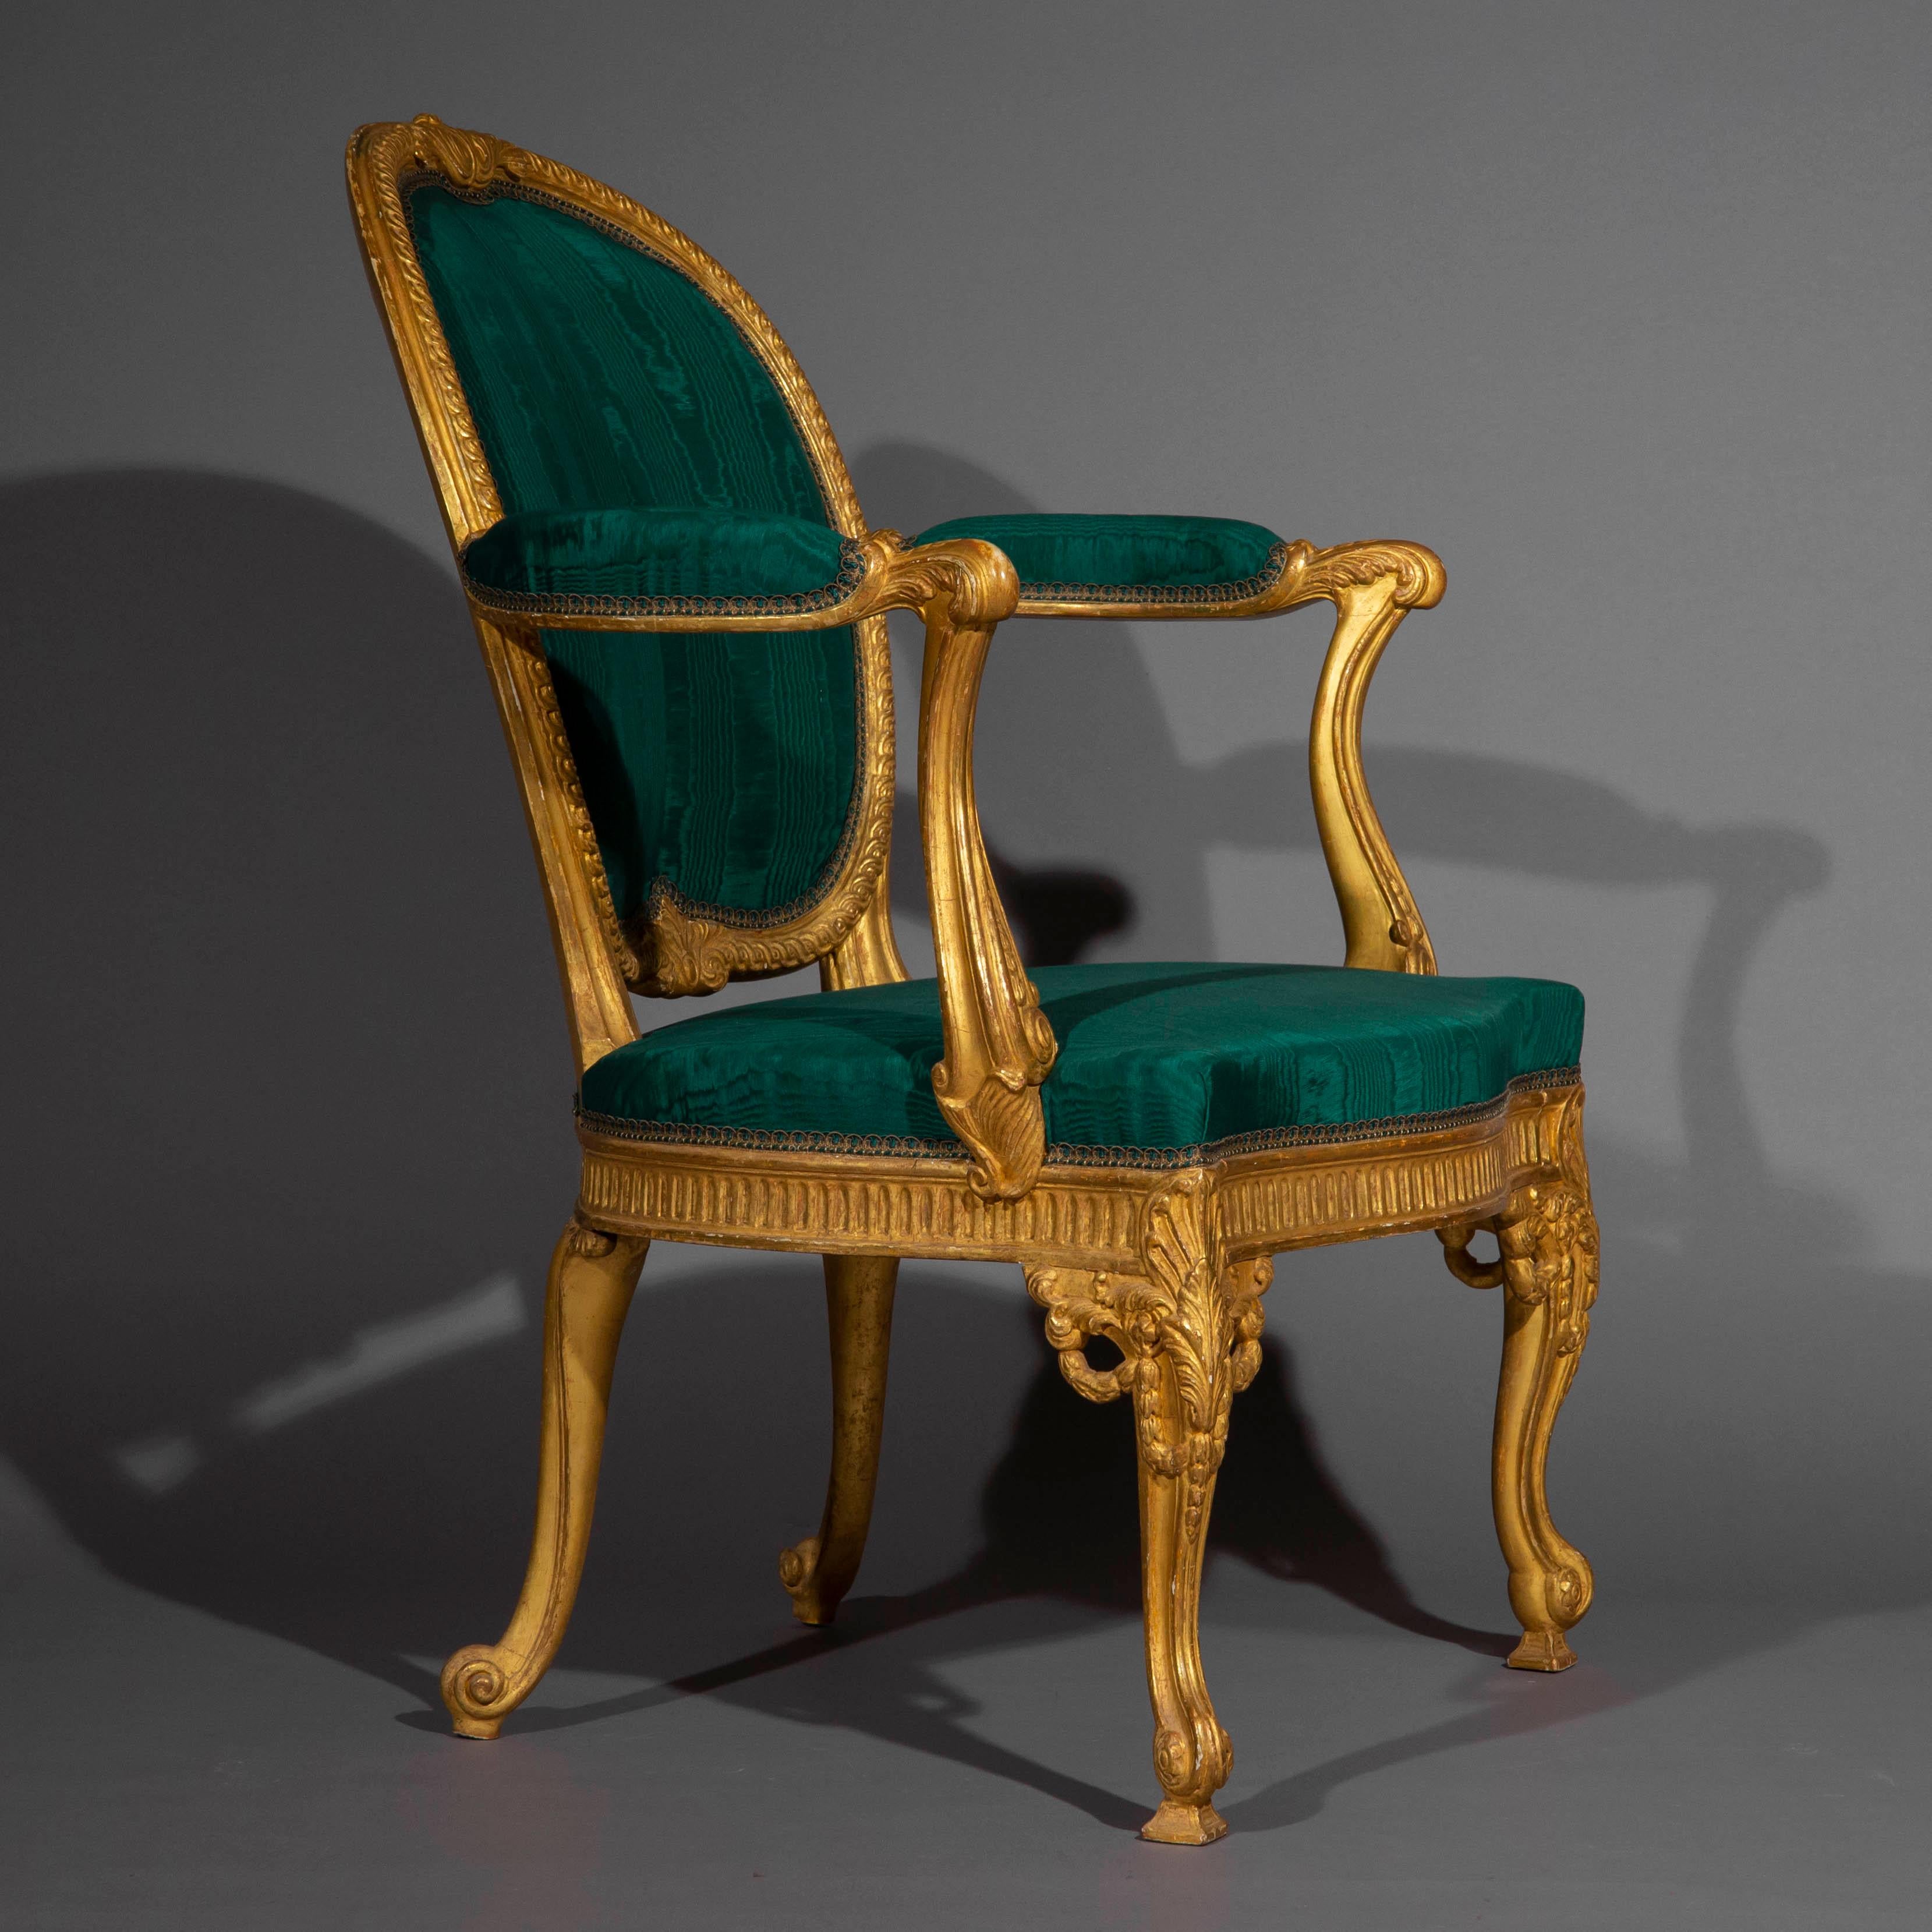 Giltwood Gilt Armchair after Thomas Chippendale - Two Available For Sale